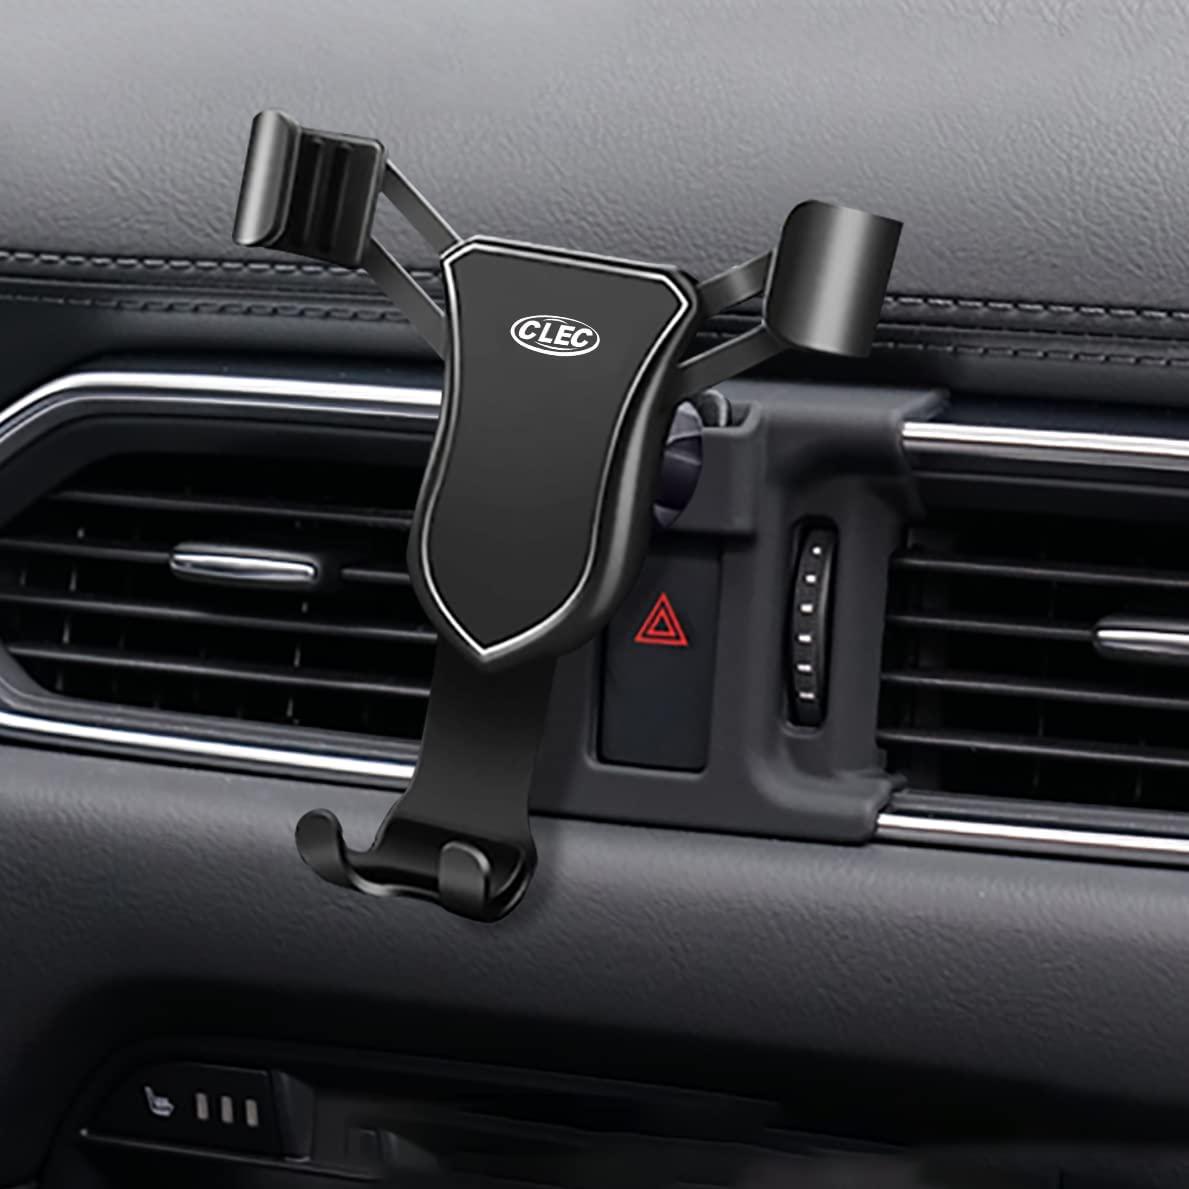 KUCOK, Kucok Car Phone Holder Fit for Mazda CX5 2017-2021,Gravity Vertical Screen Version Air Vent Phone Mount for CX5,Auto Dash Mount Compatible with 4.7-6.7 Inch Cell Phone iPhone Samsung